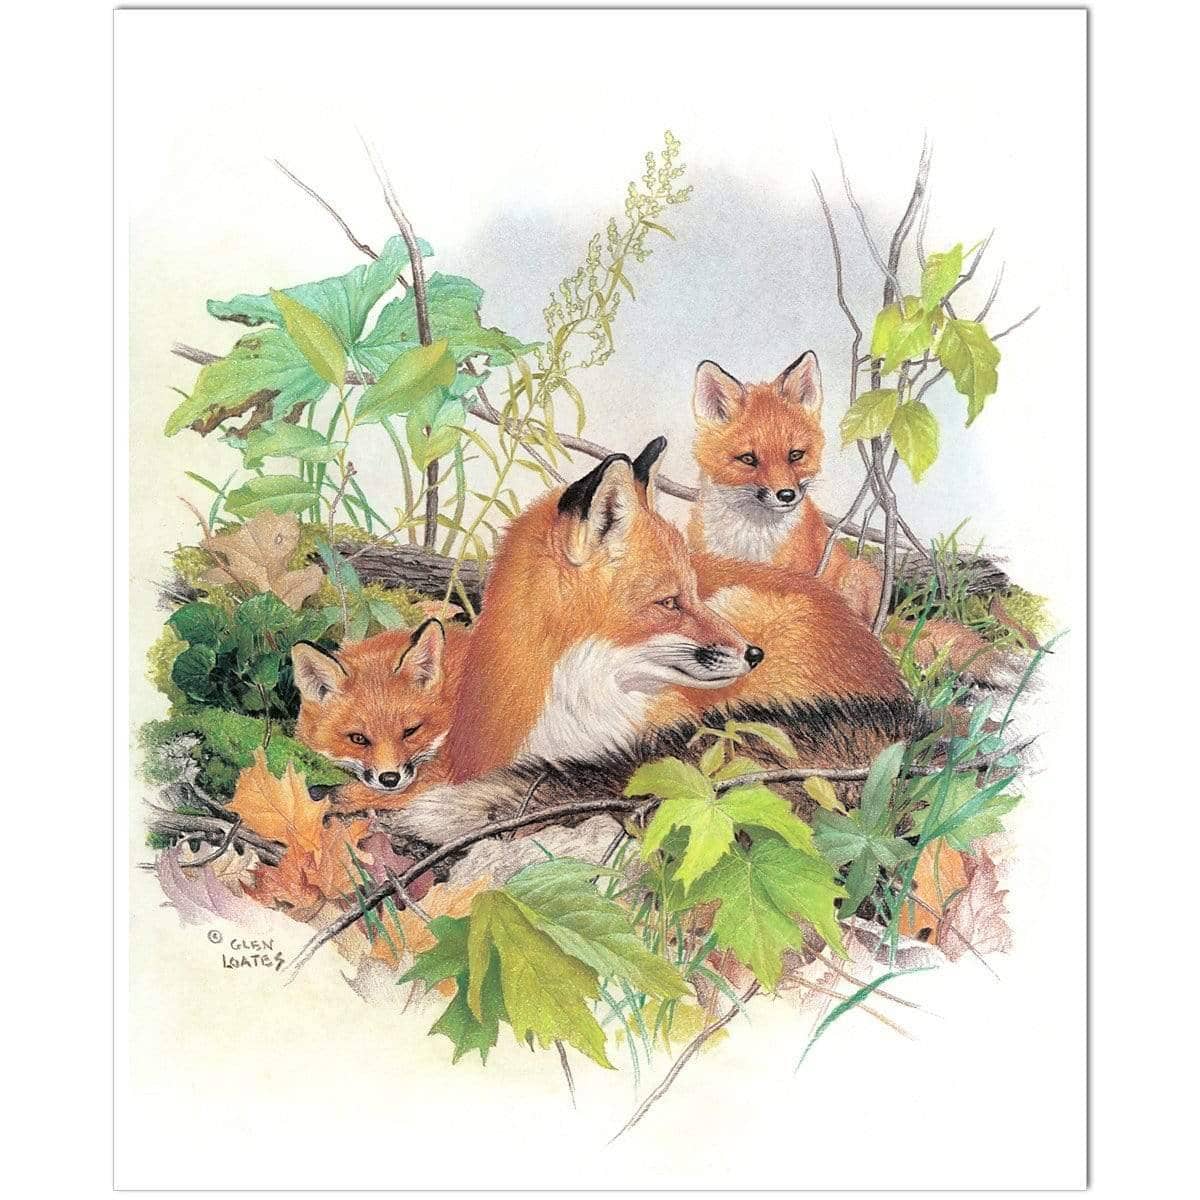 Red Fox and Kits - Art Print | Artwork by Glen Loates